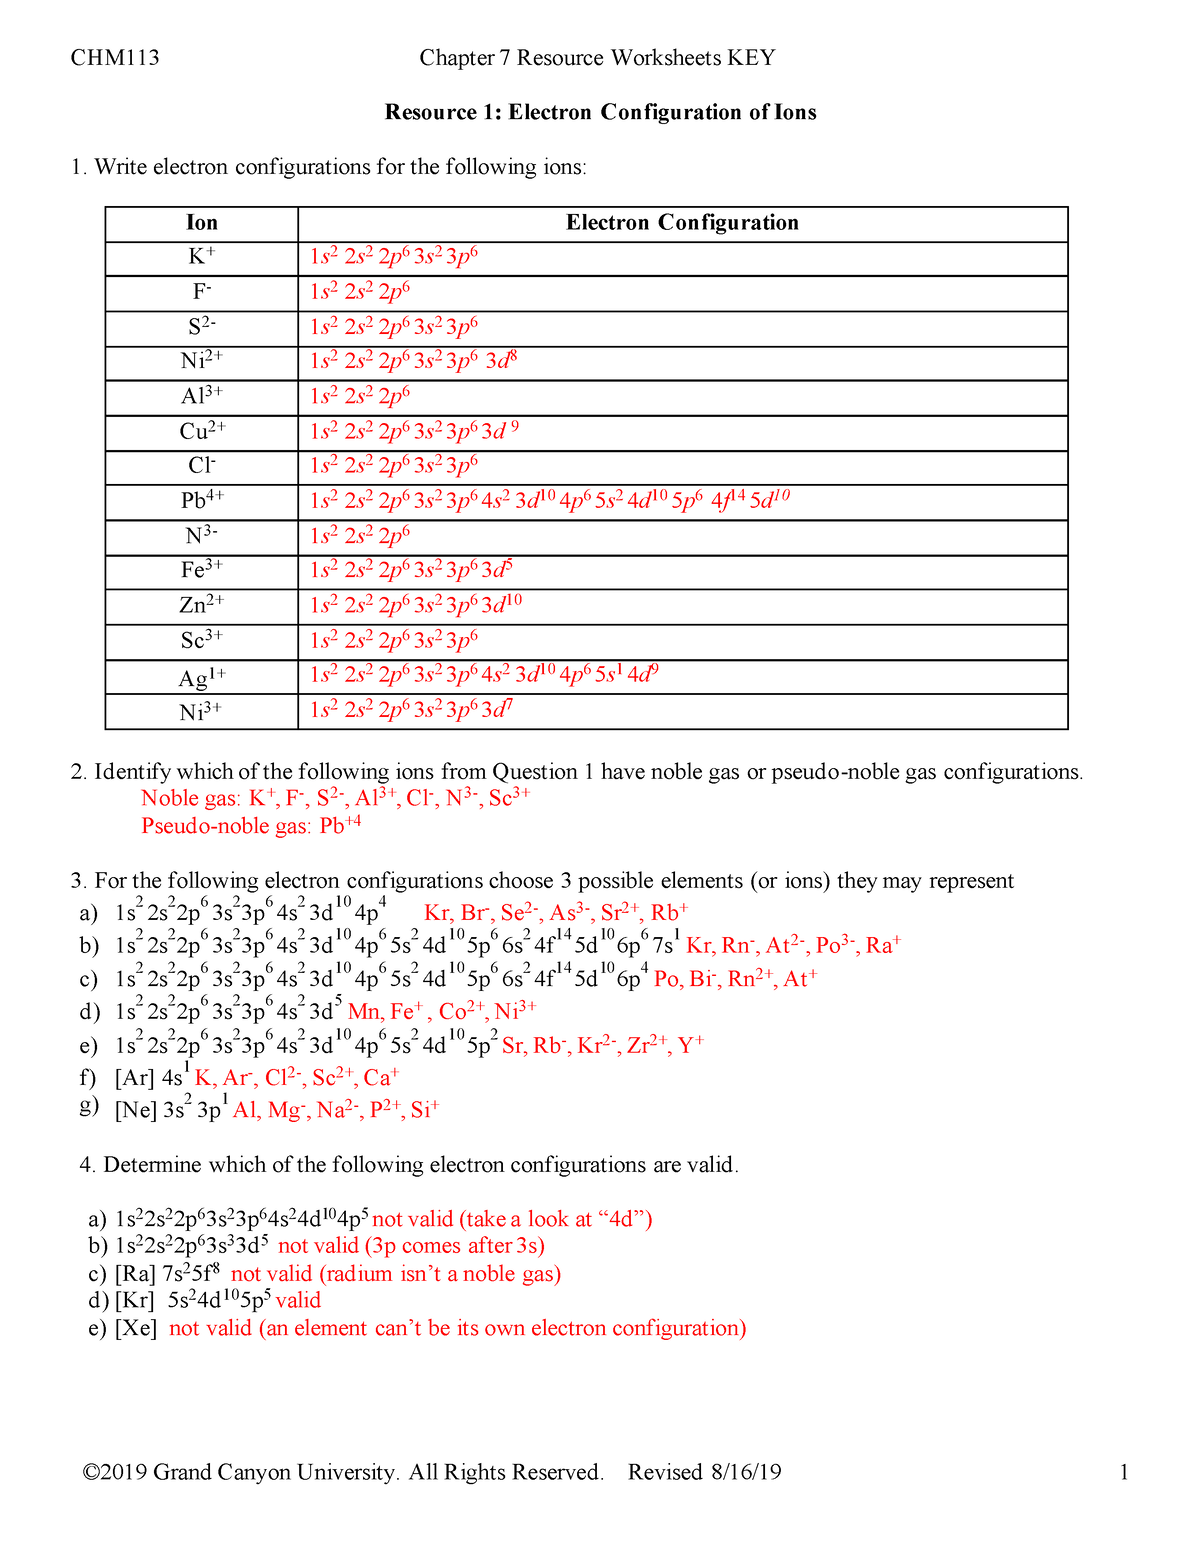 chm113-t4-ch7-worksheets-key-resource-1-electron-configuration-of